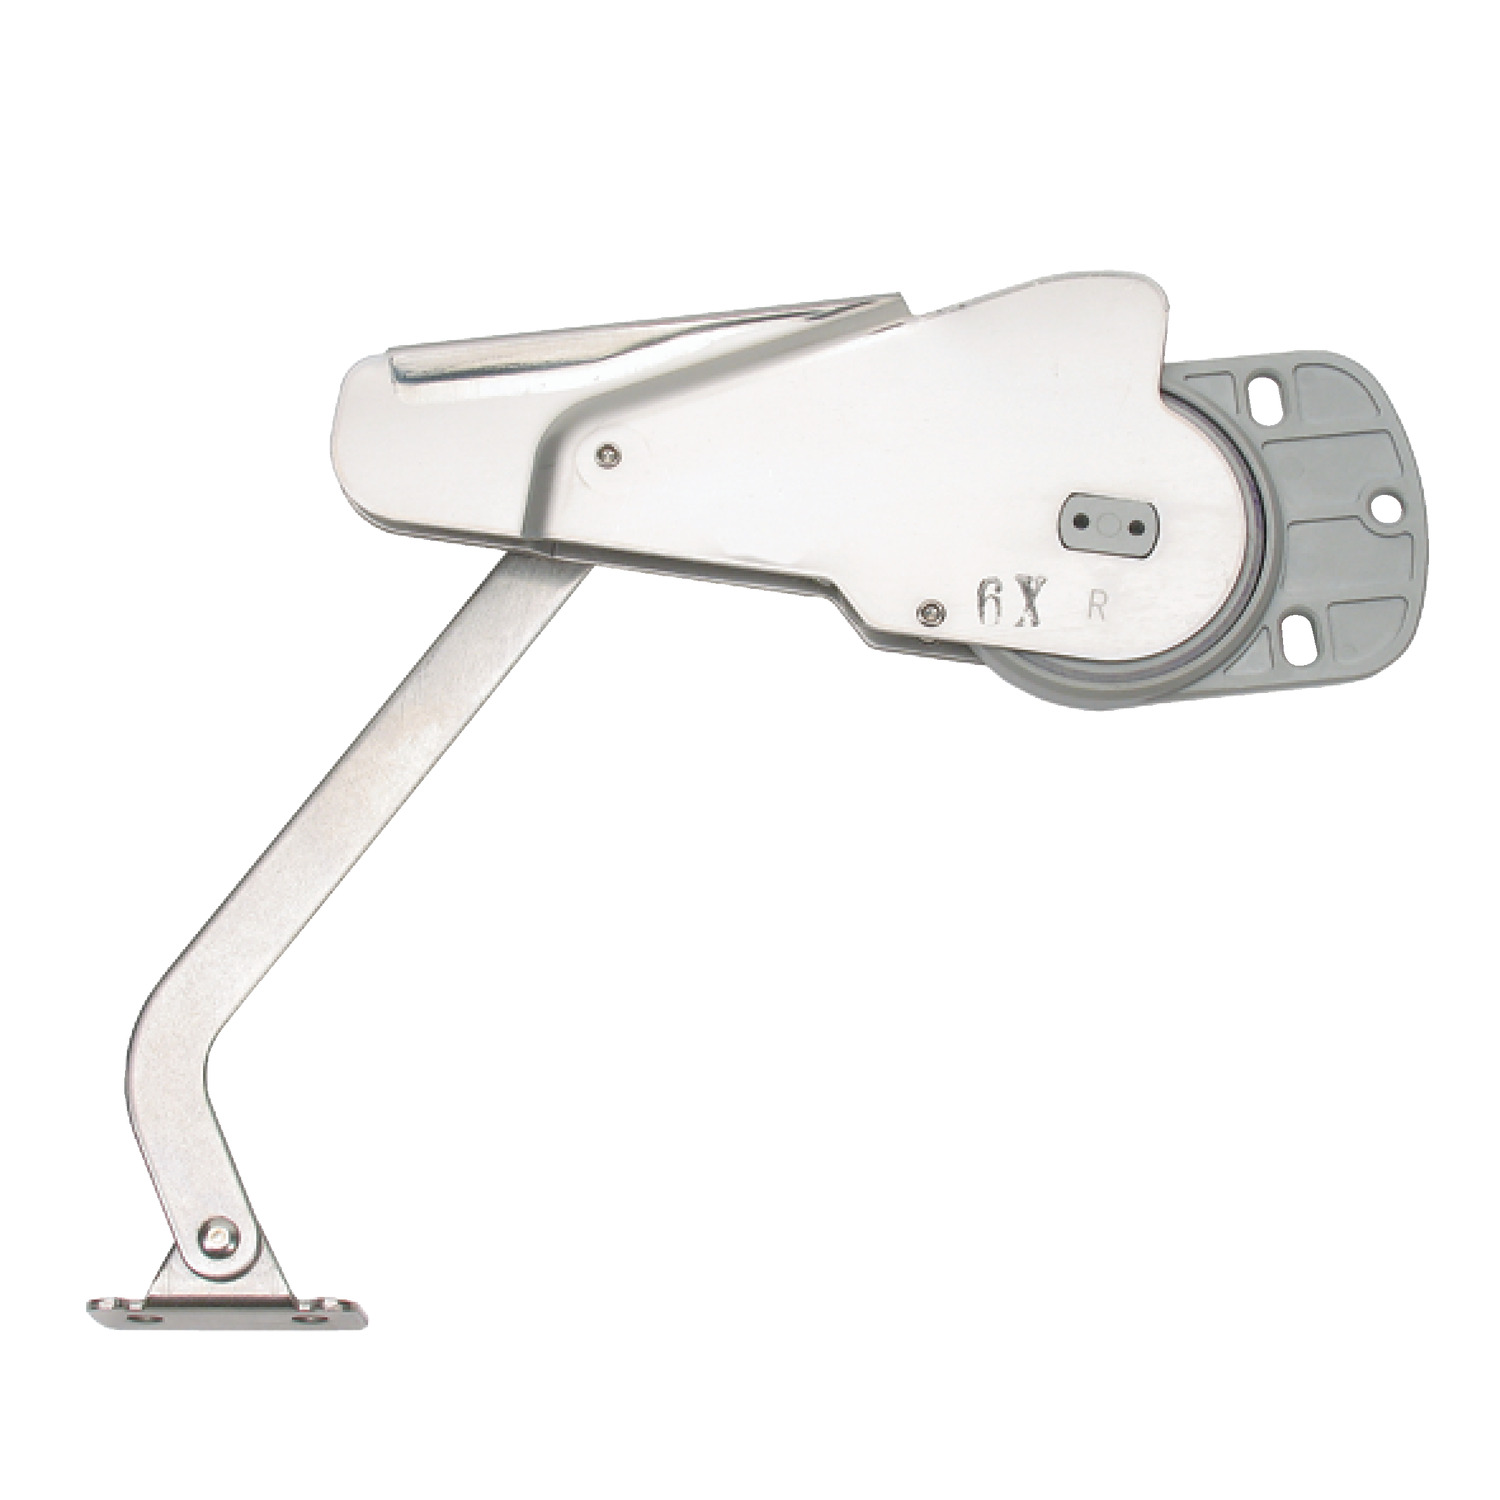 Mini-Door Closer - Stainless Steel The stay holds door in 90° open position. When pushed to close, the stay gently pulls door closed. For mounting in the inside top panel of door.